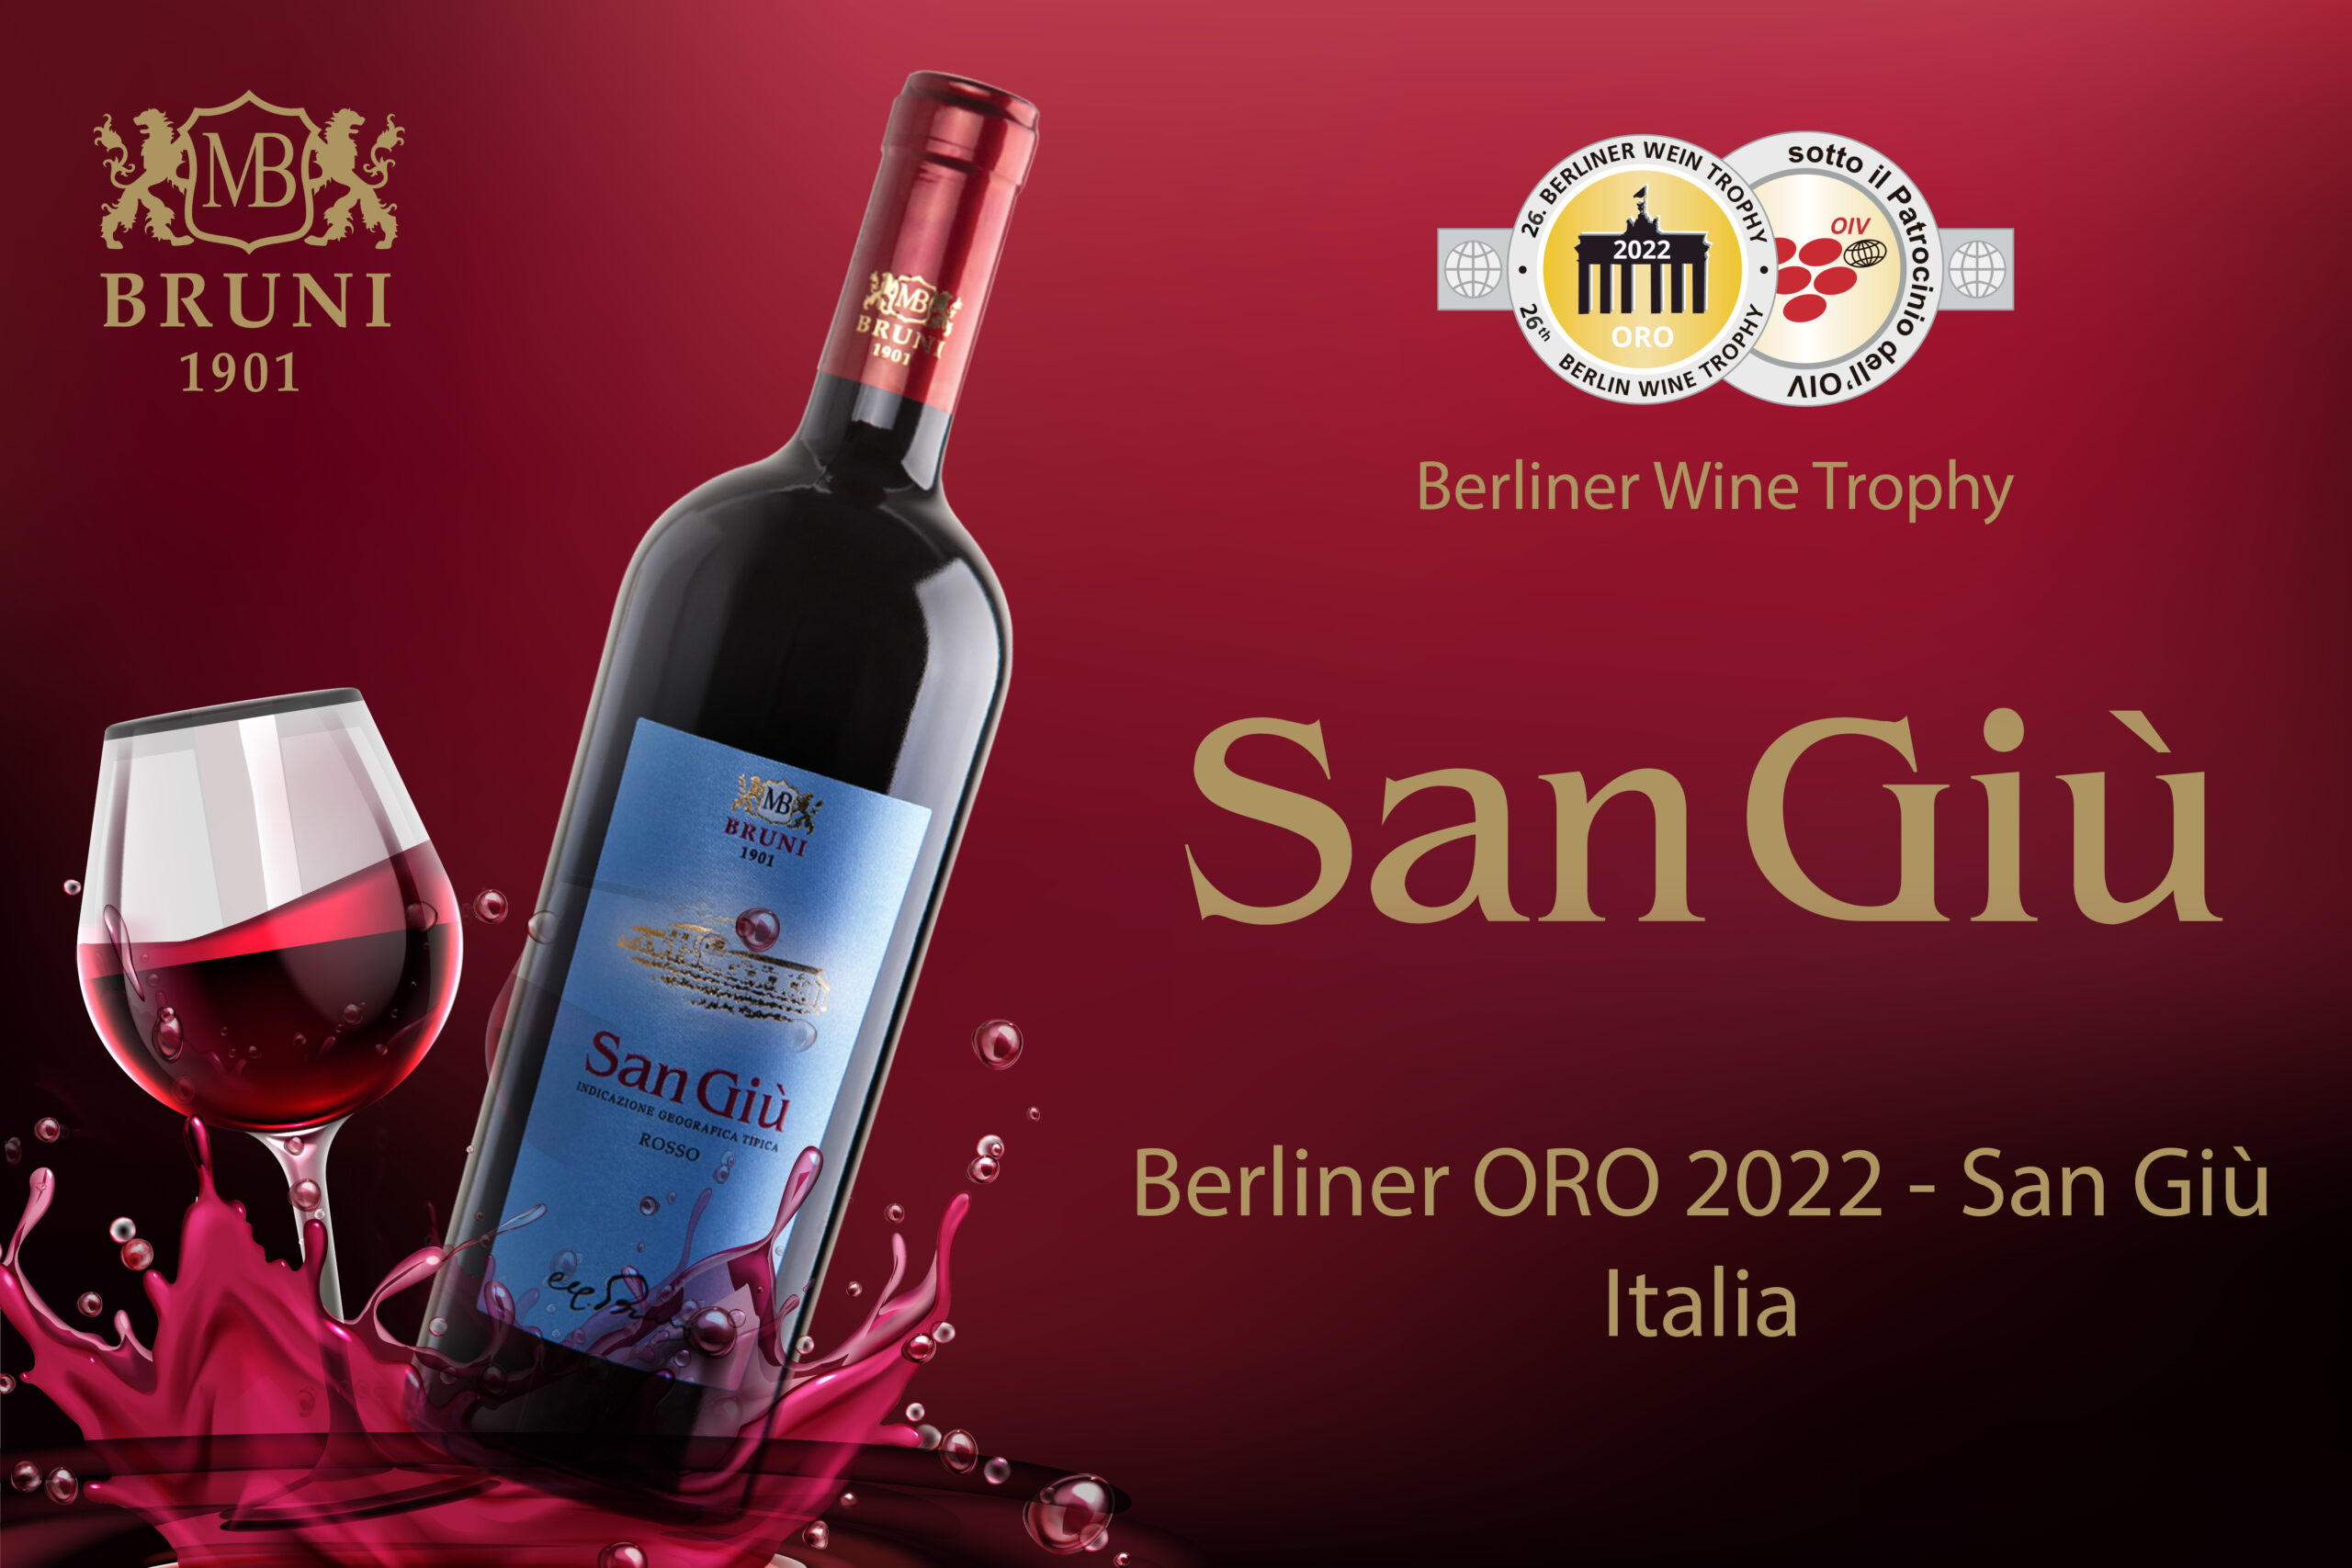 “Survia” and “San Giù” protagonists at the Berliner Wine Trophy.